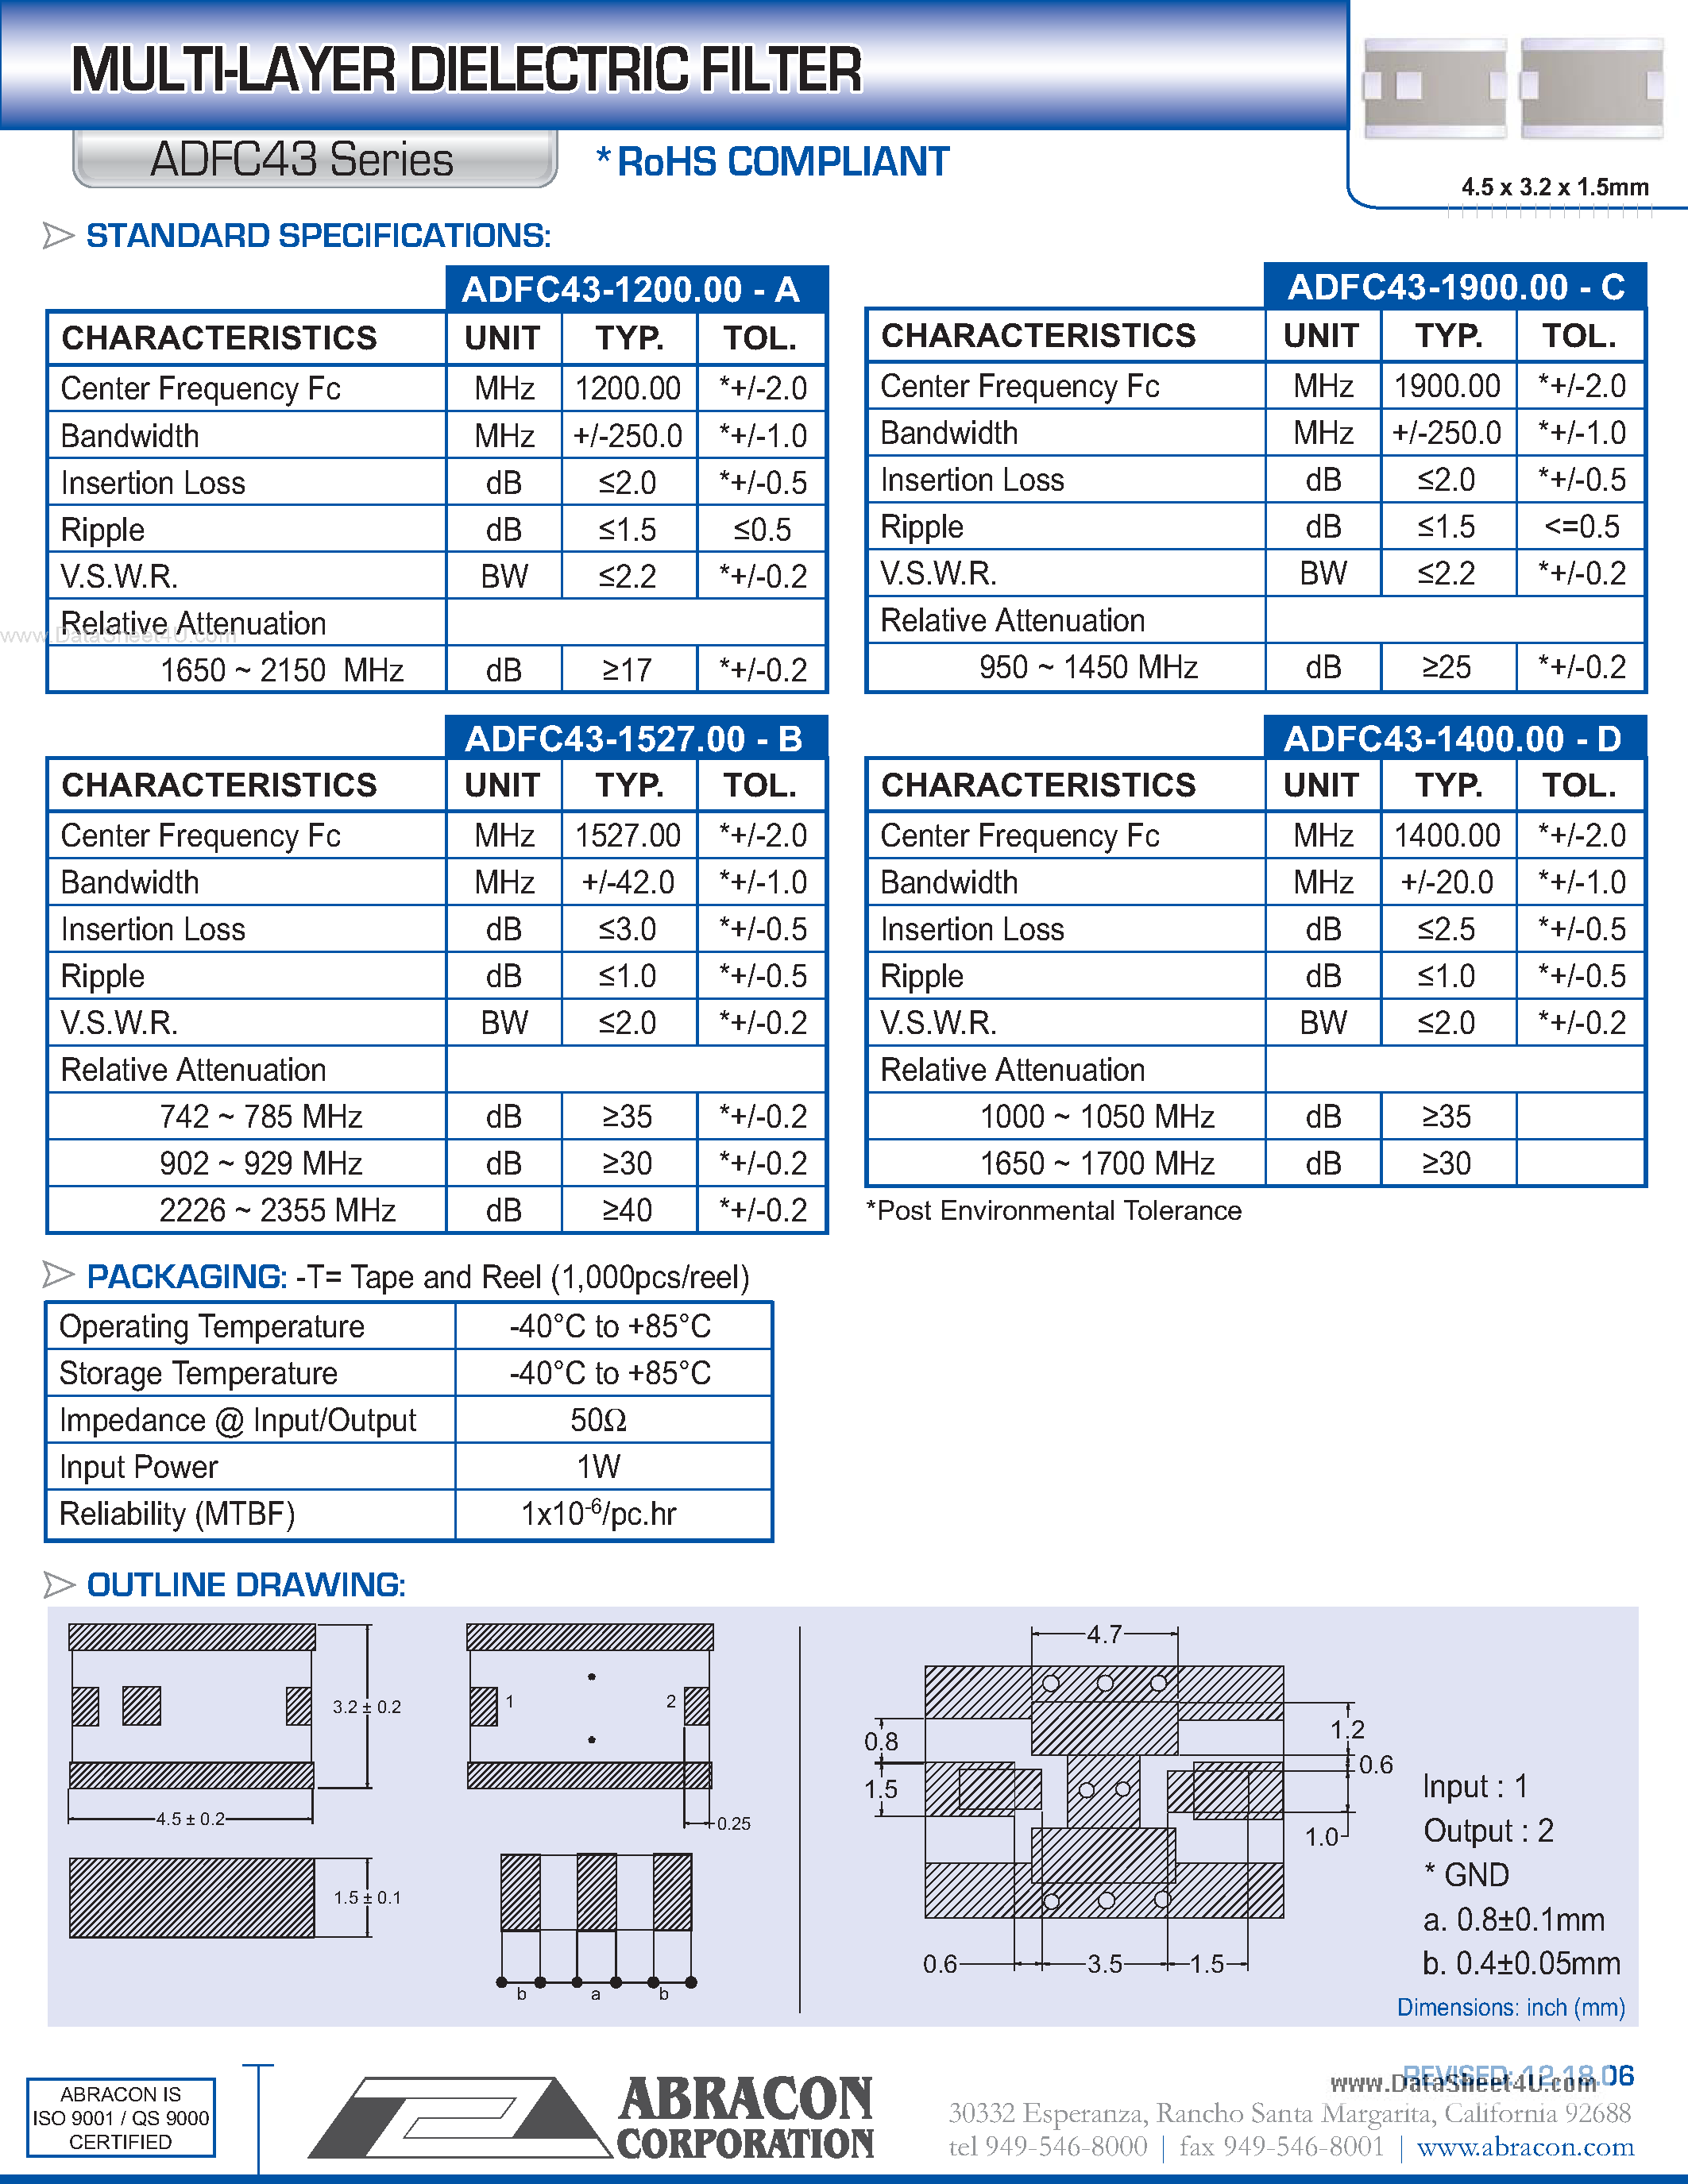 Datasheet ADFC43 - MULTI-LAYER DIELECTRIC FILTER page 1